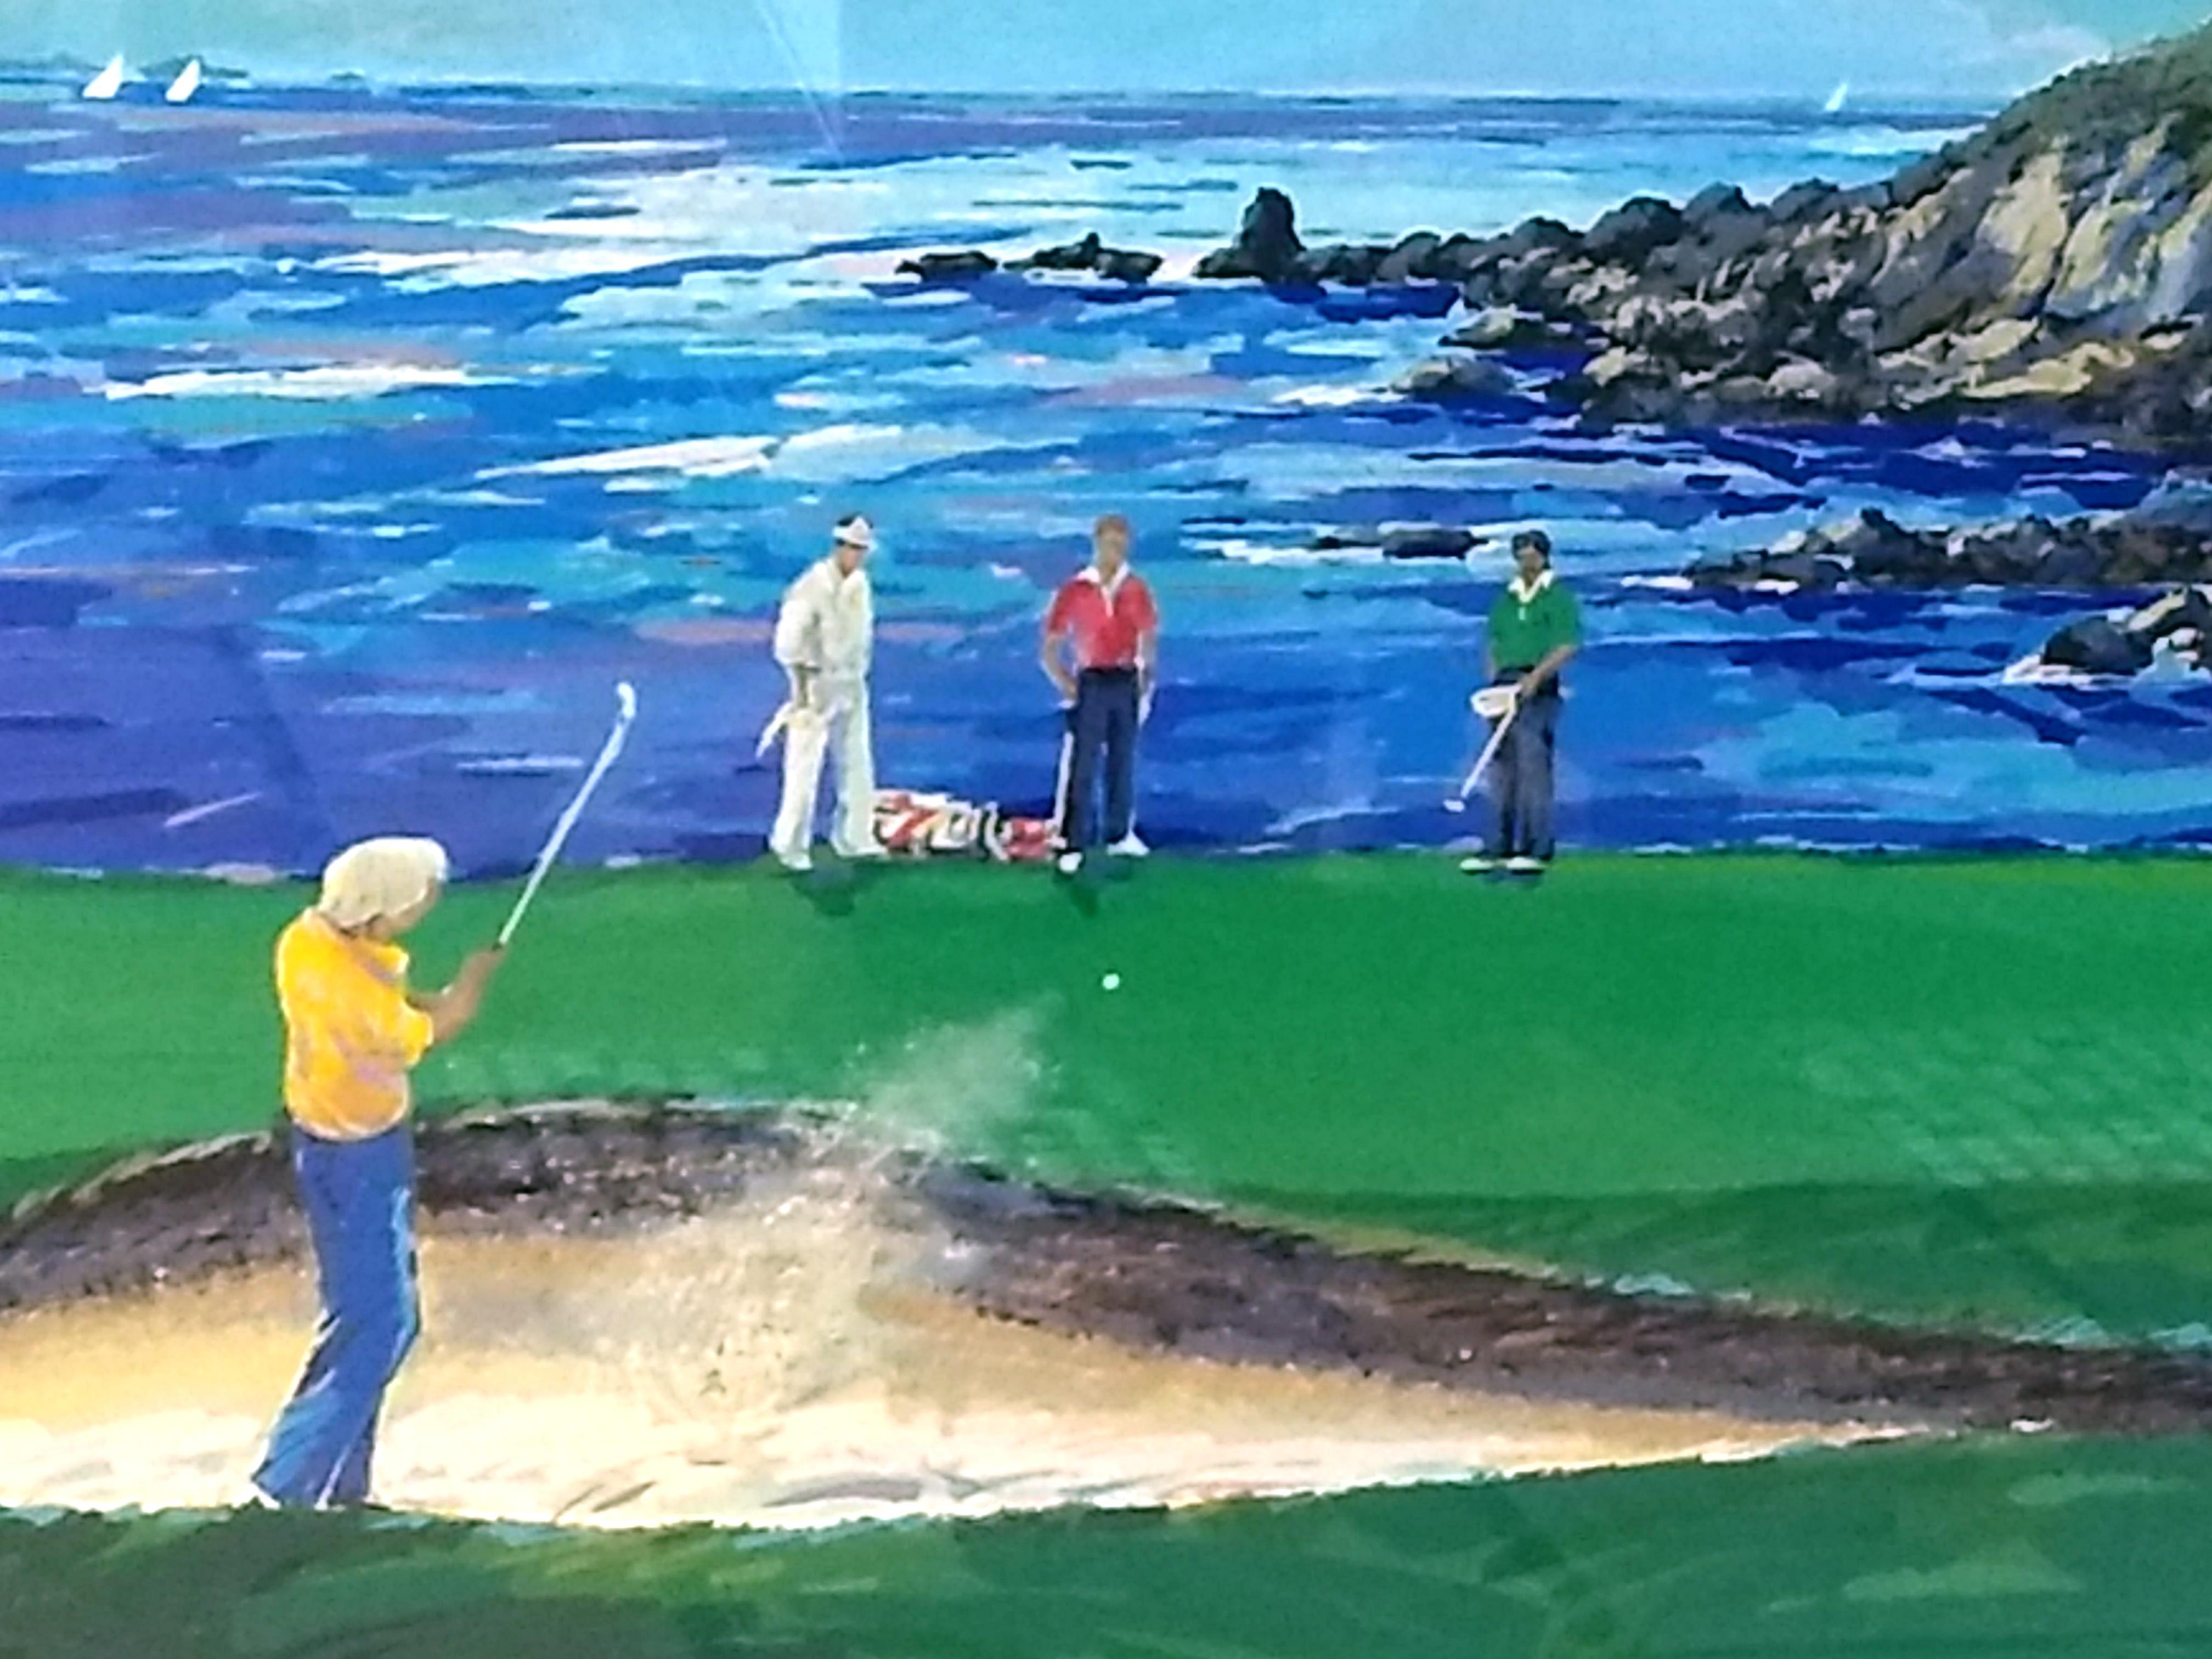 Postmodern American framed serigraph on paper, titled '18th At Pebble Beach', depicting a game of golf, by Steve Bloom. The piece dates from the 1990s, is signed in pencil, marked with title and edition number (36 out of 325) and is in great vintage